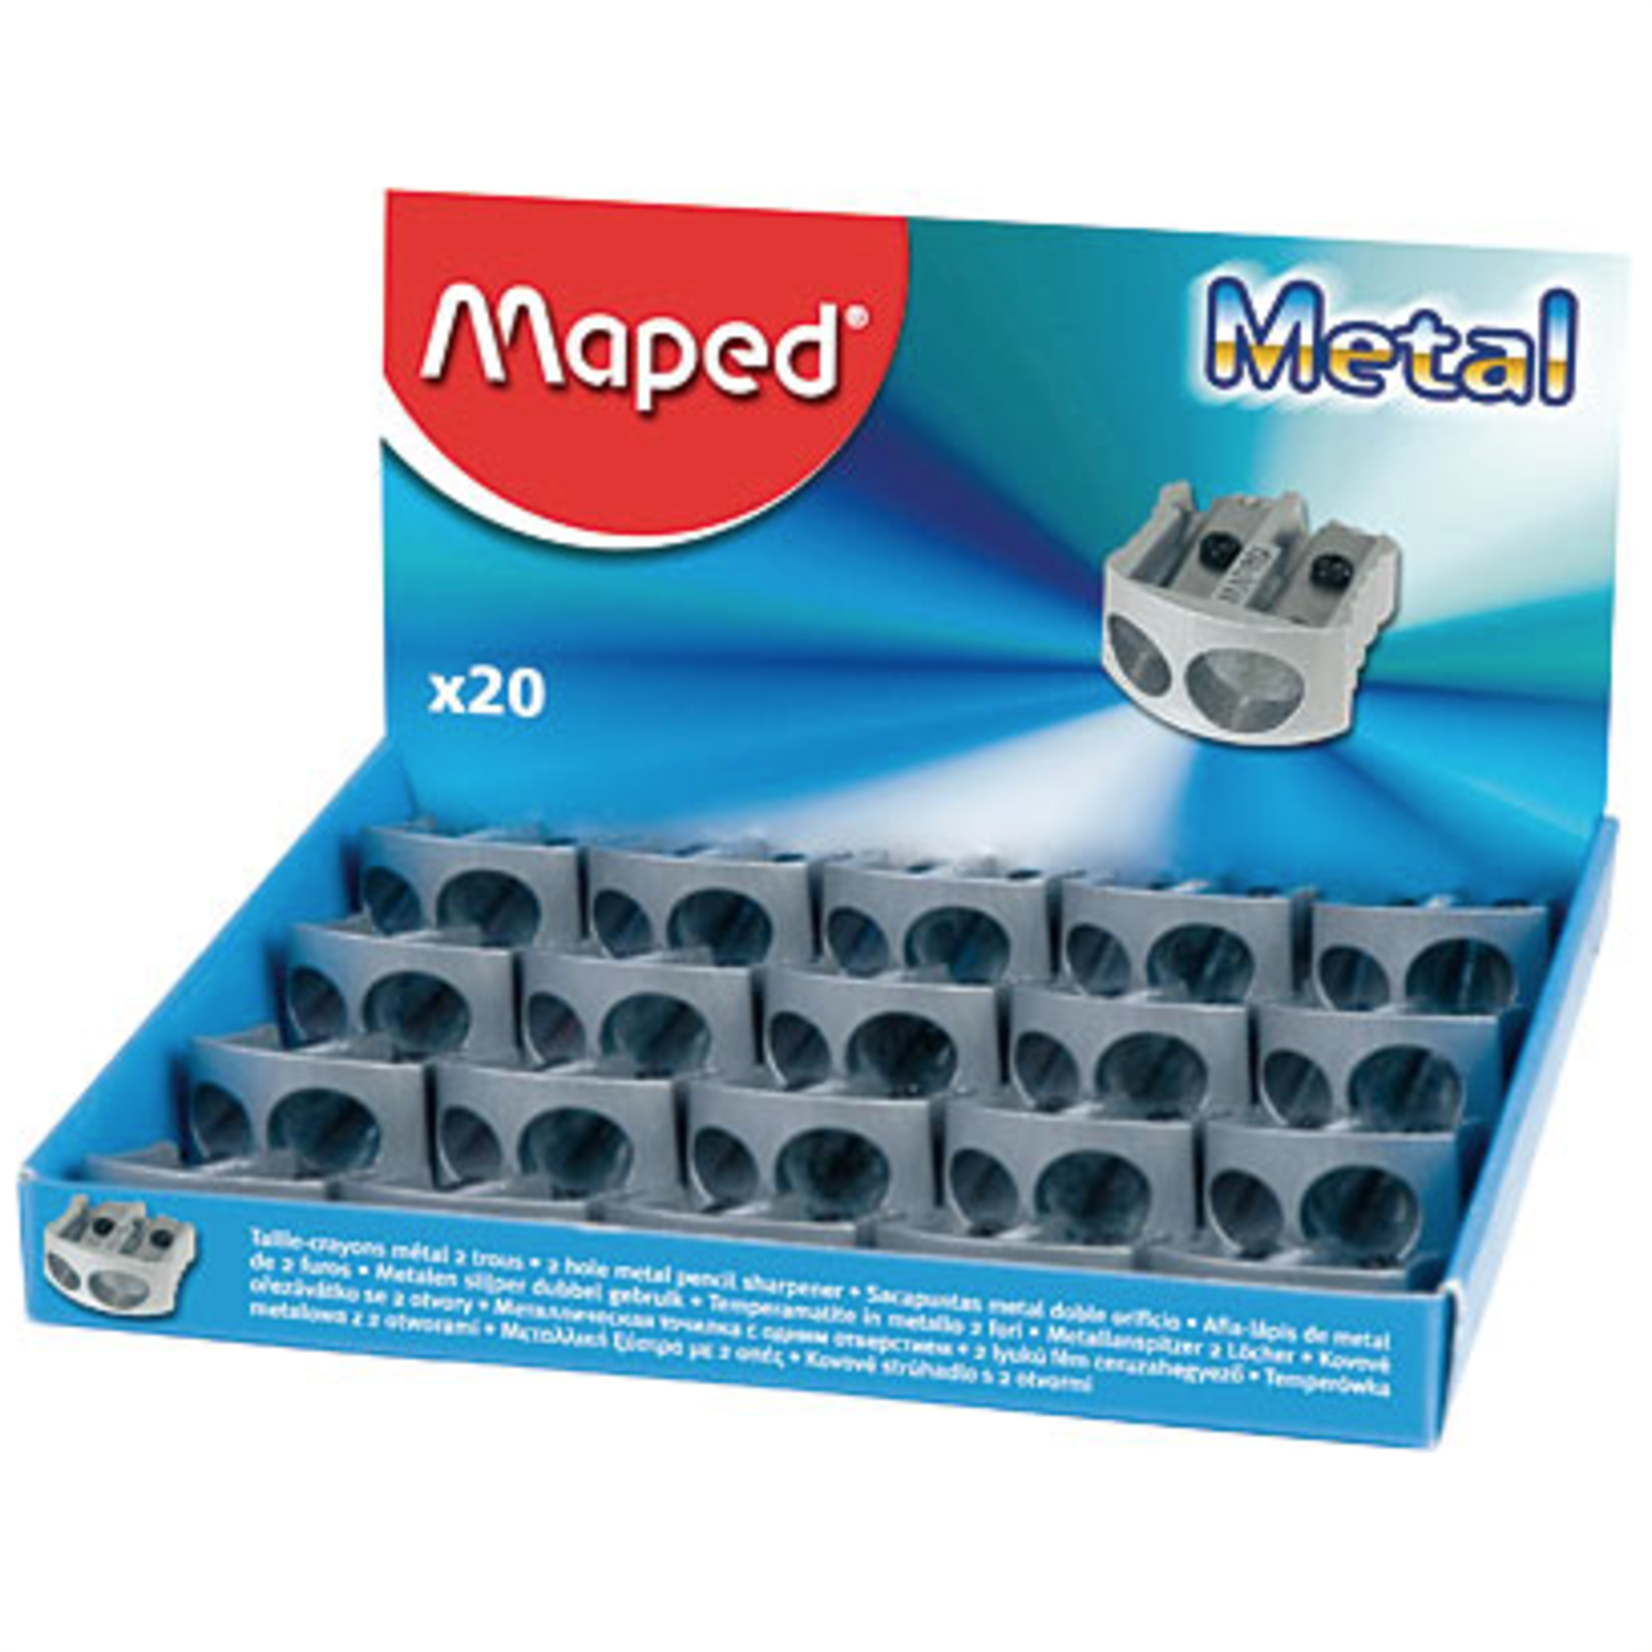 MAPED MAPED DOUBLE HOLE METAL SHARPENER